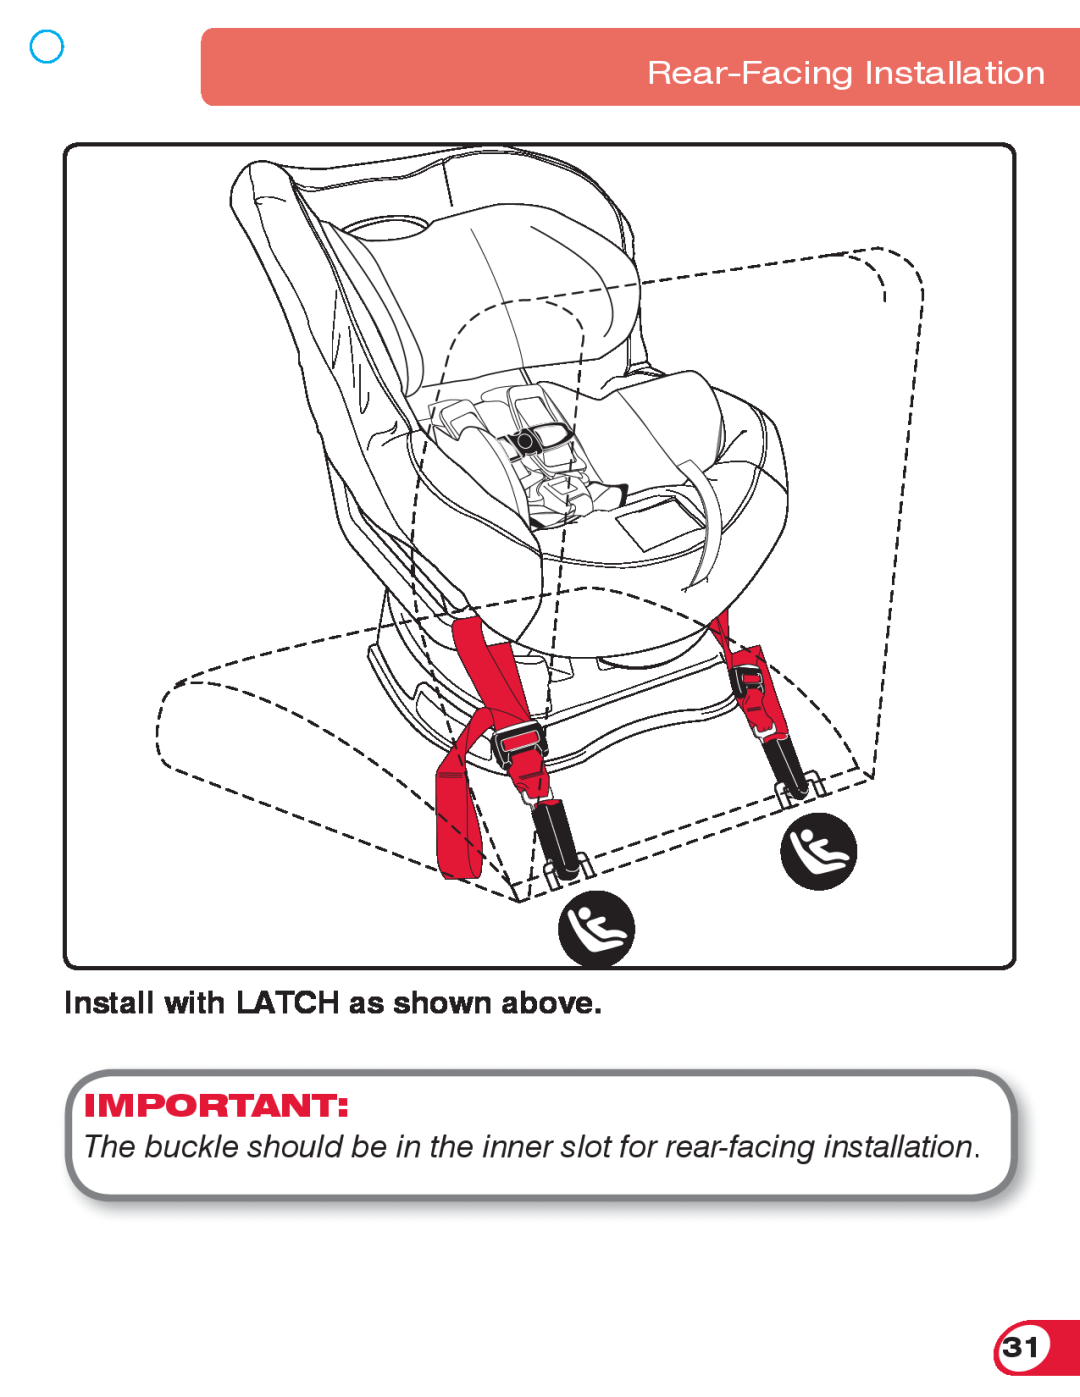 Britax 70 CS manual Install with LATCH as shown above, Rear-Facing Installation 